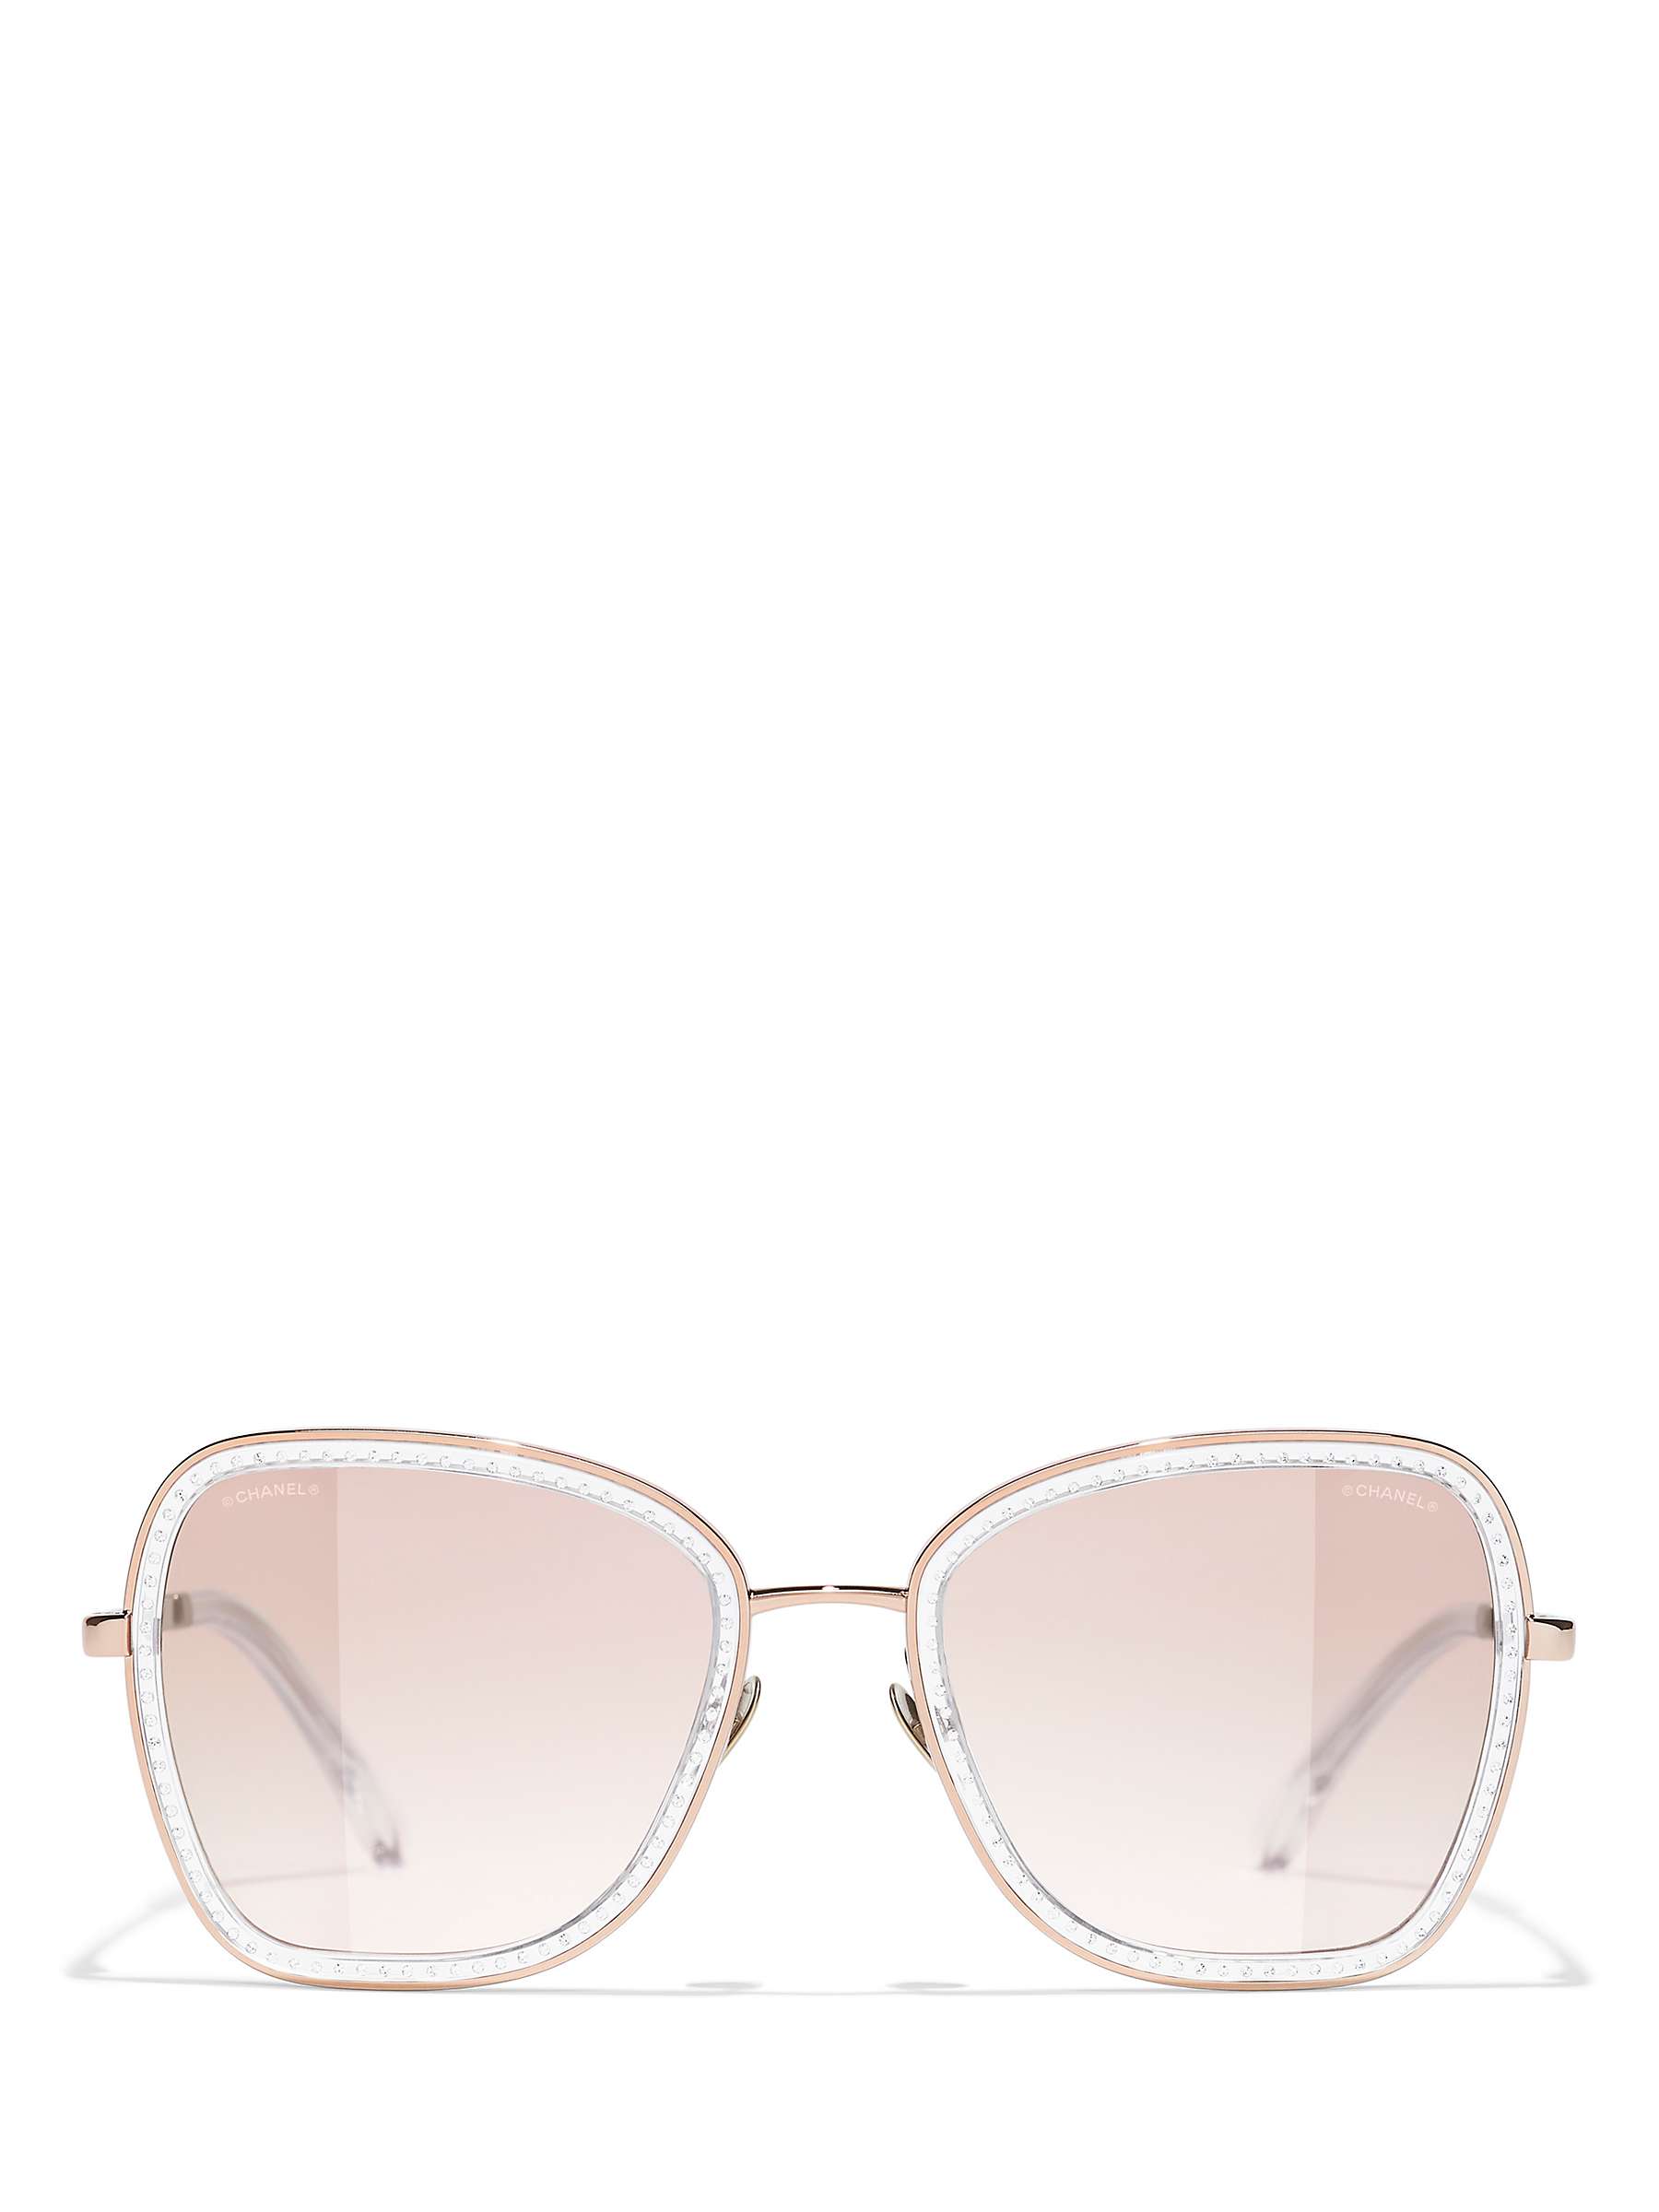 Buy CHANEL Square Sunglasses CH4277BC Bronze/Pink Gradient Online at johnlewis.com